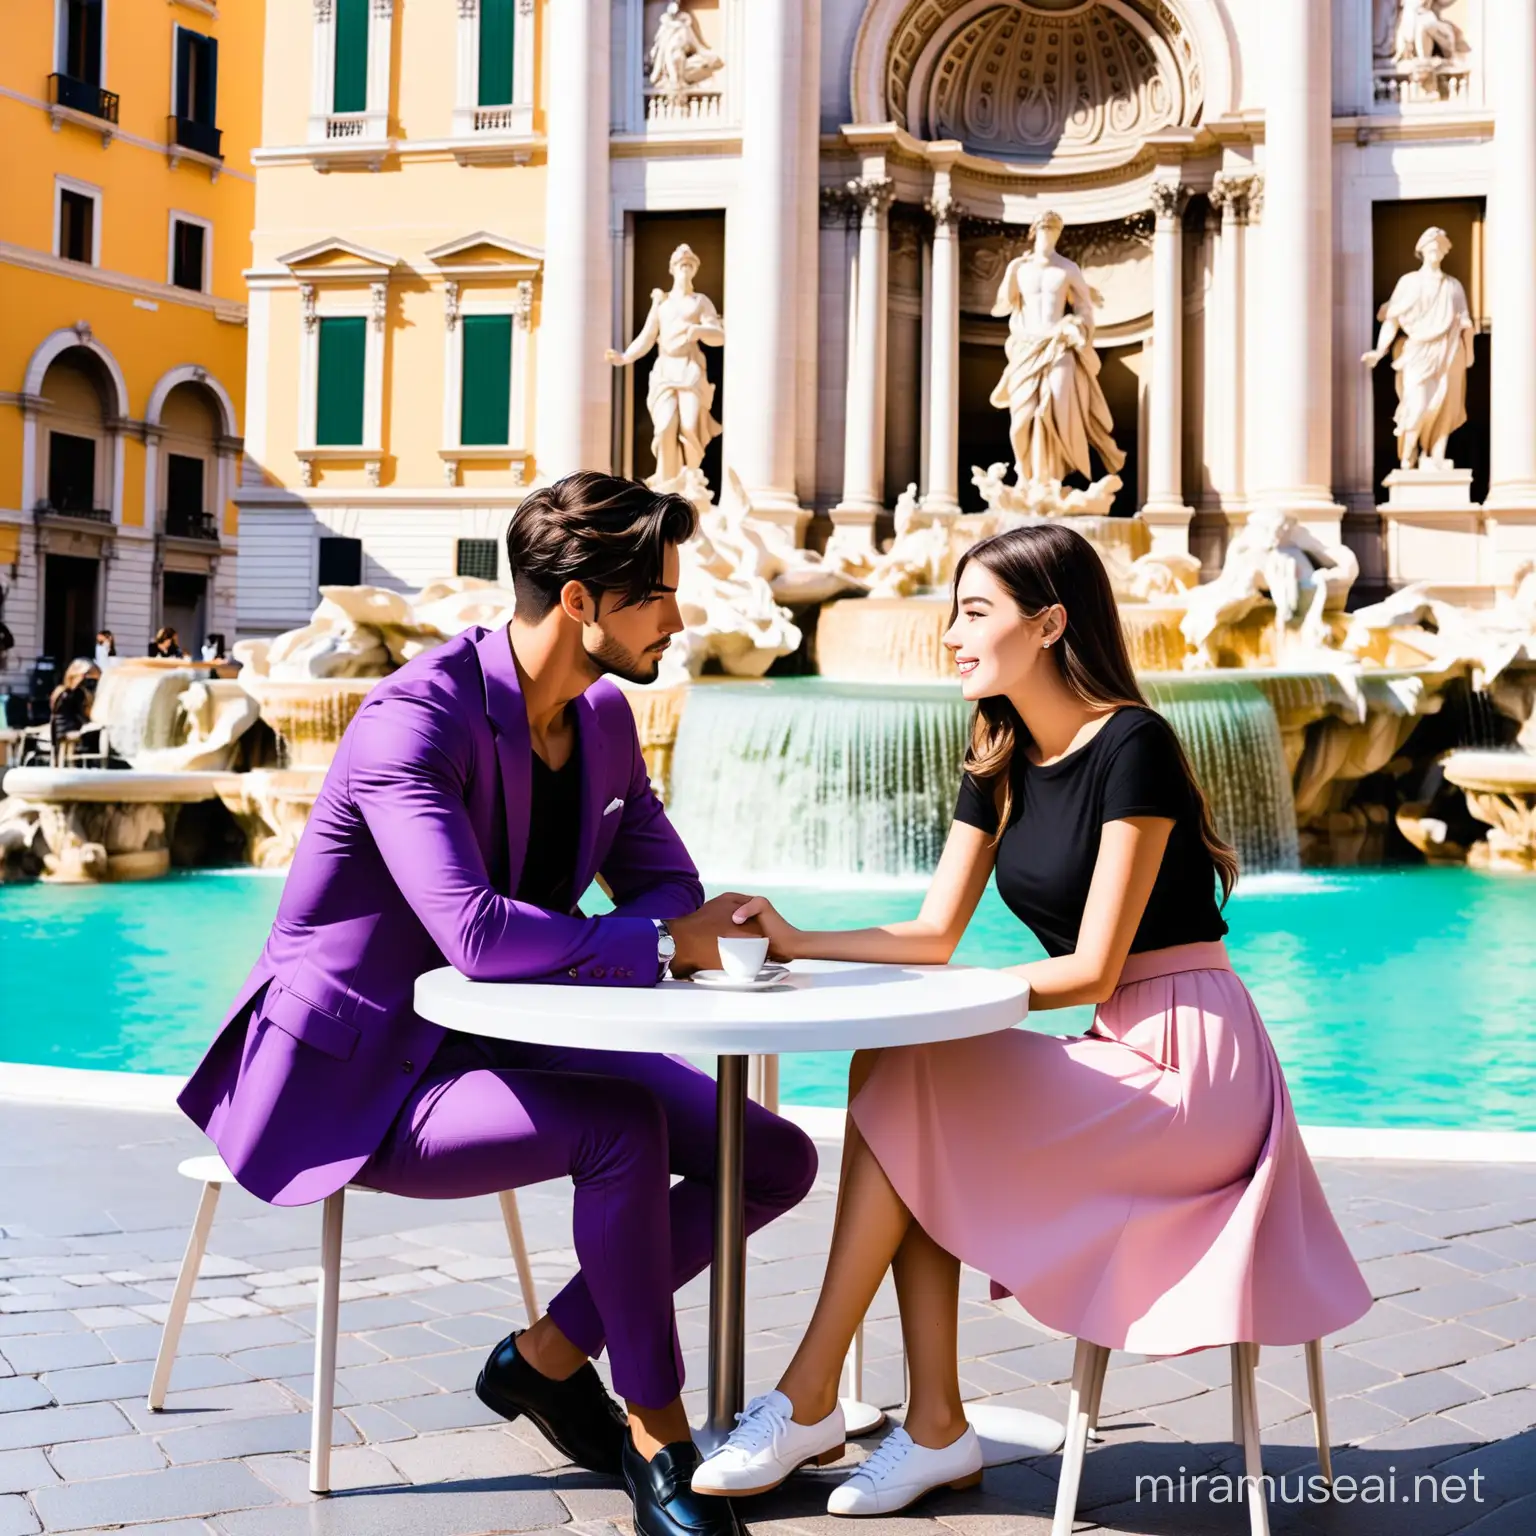 Romantic Conversation at Trevi Fountain Caf Handsome Man and Beautiful Woman in Purple and Pink Attire